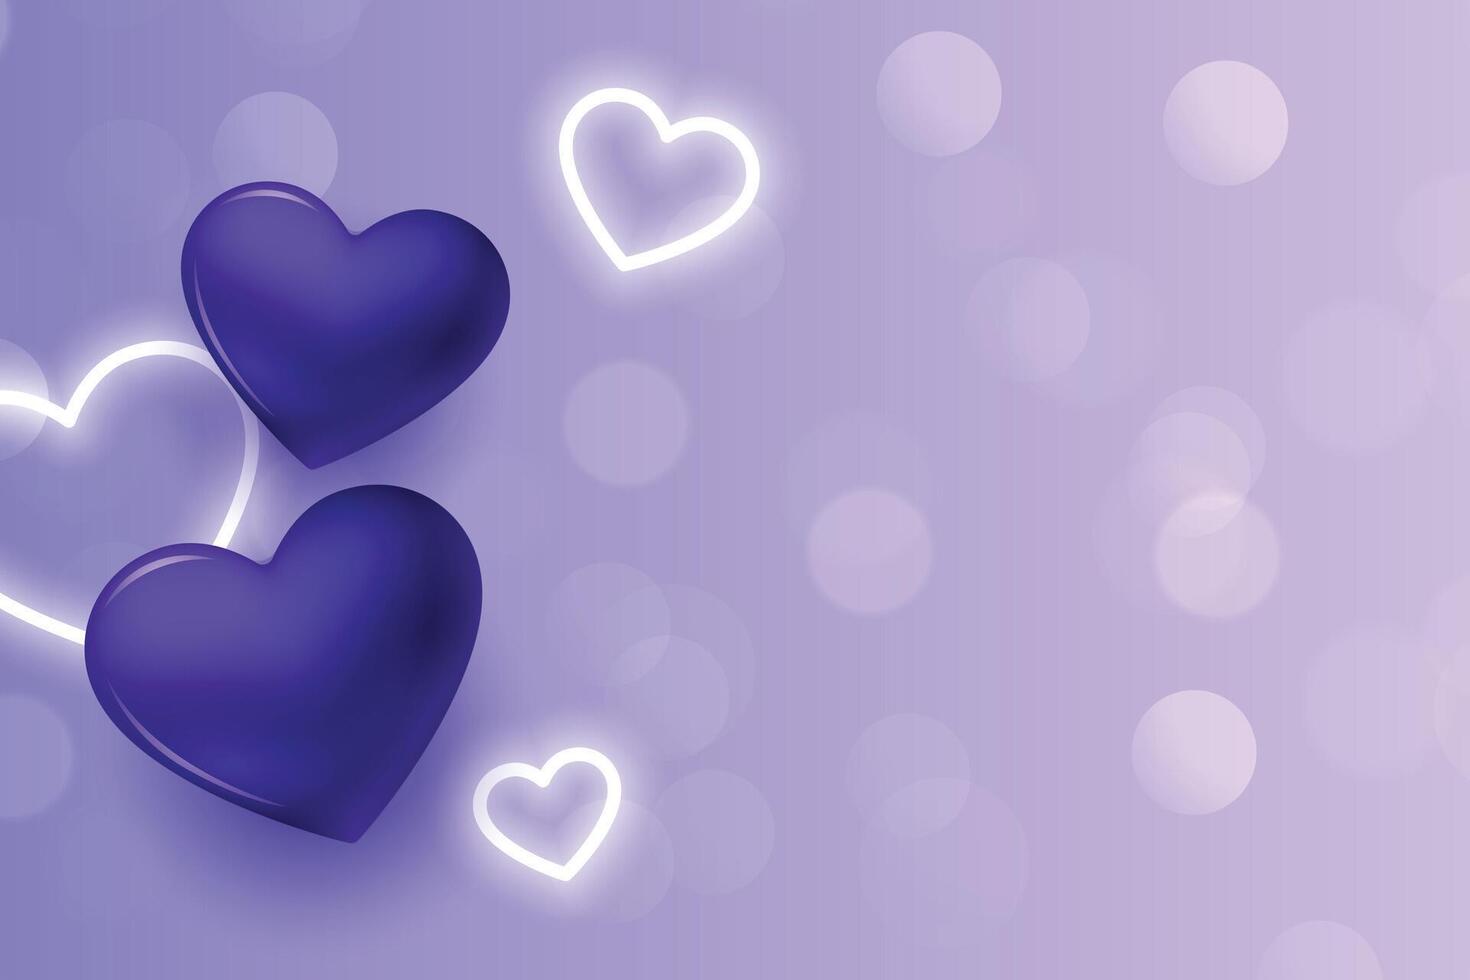 purple hearts background with glowing neon cute hearts vector